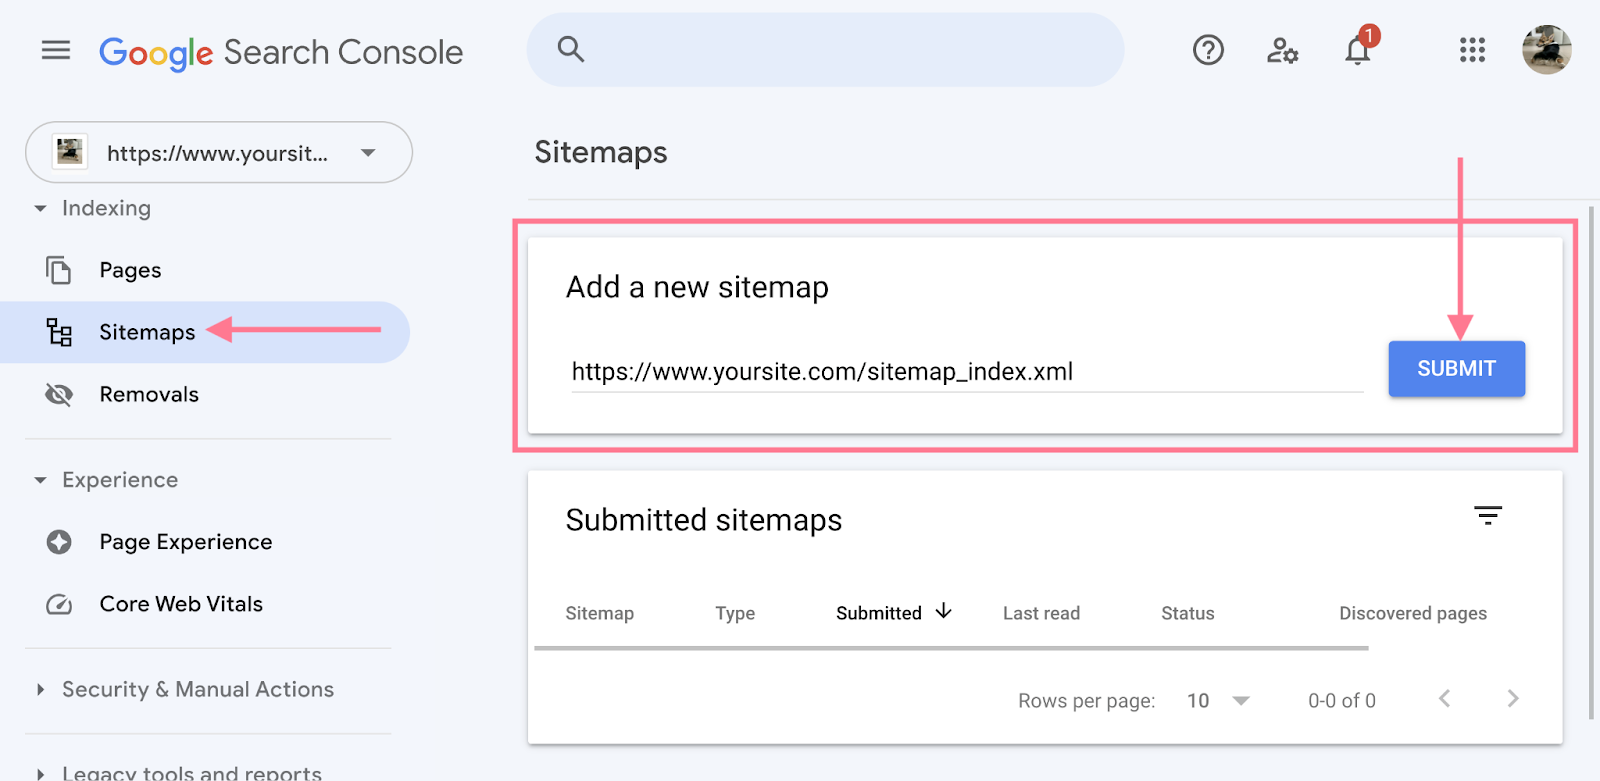 Submit a sitemap
